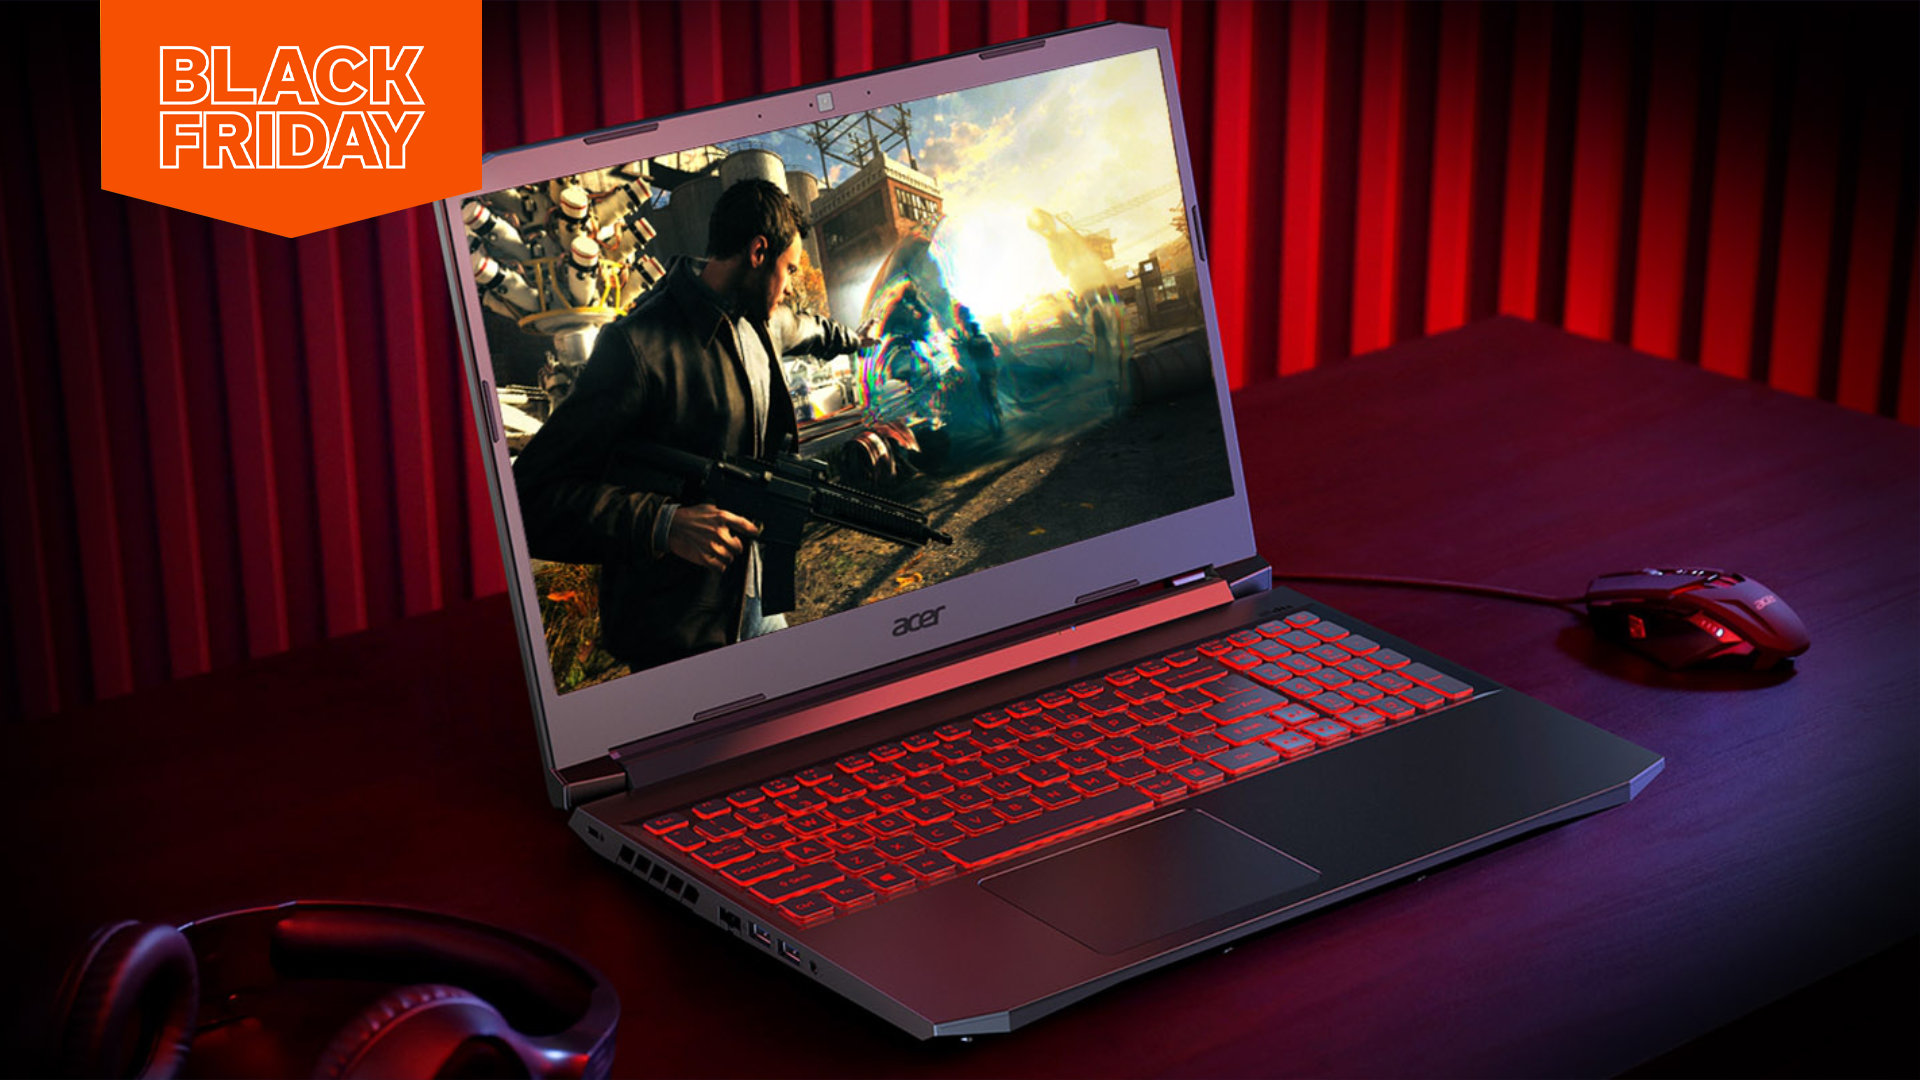 This Acer Nitro 5 gaming laptop packs an RTX 3070 GPU and a $200 discount